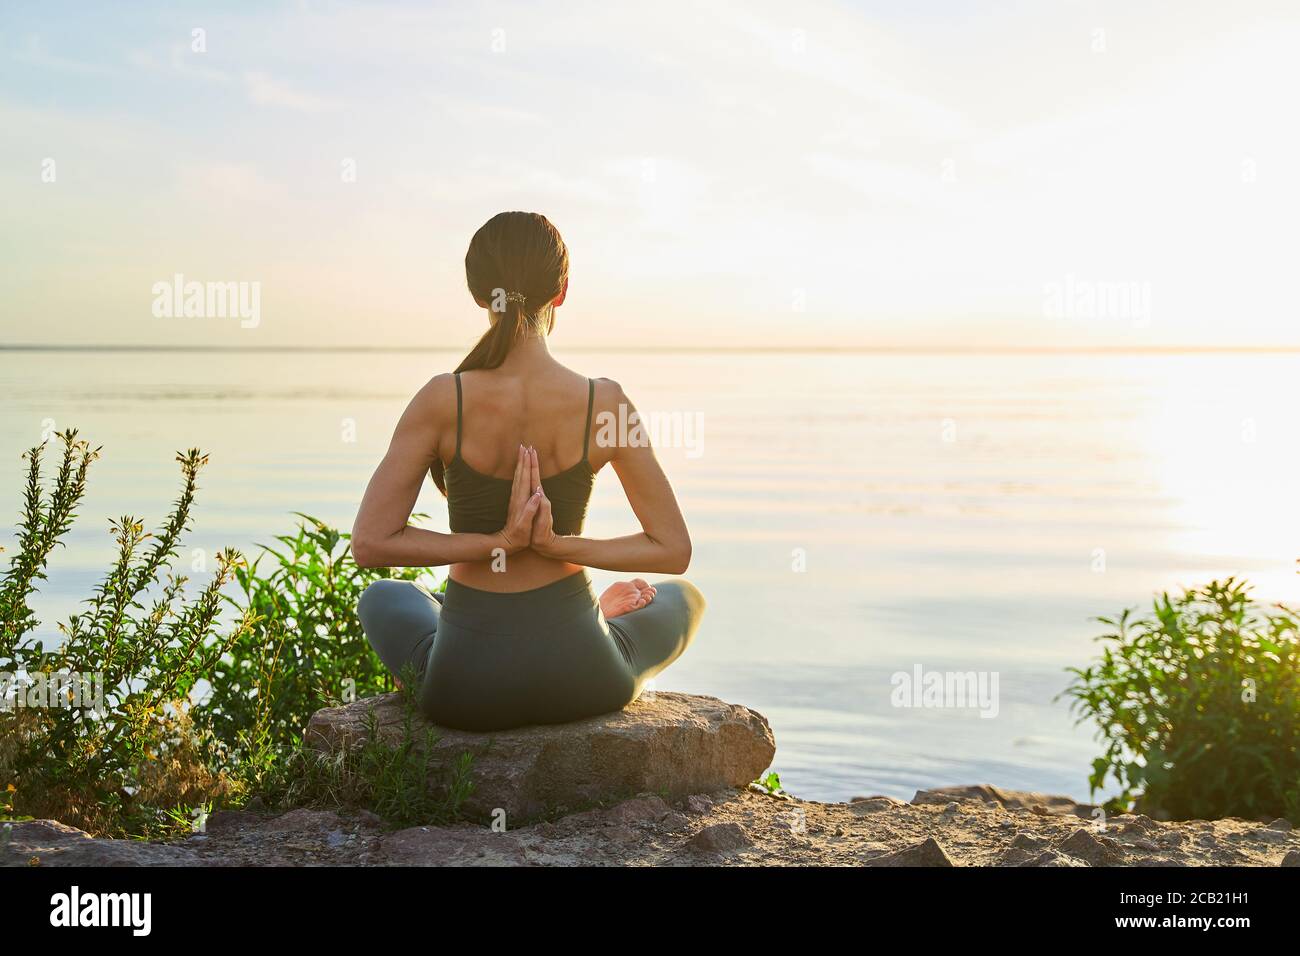 Sporty young woman doing reverse prayer pose outdoors by the sea Stock Photo